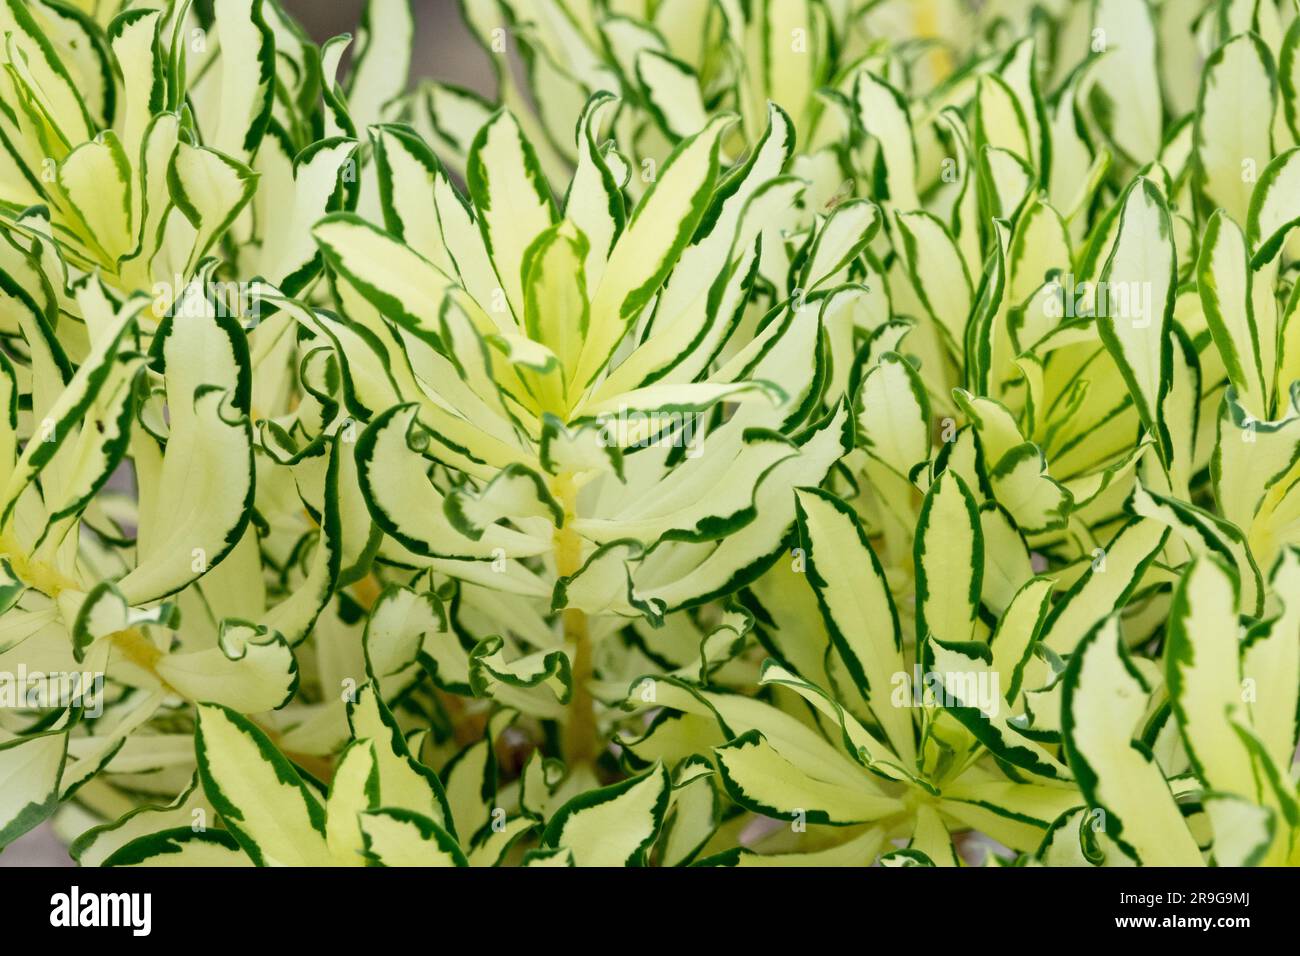 Daphne x burkwoodii 'Briggs Moonlight', Variegated, Leaves close up Stock Photo